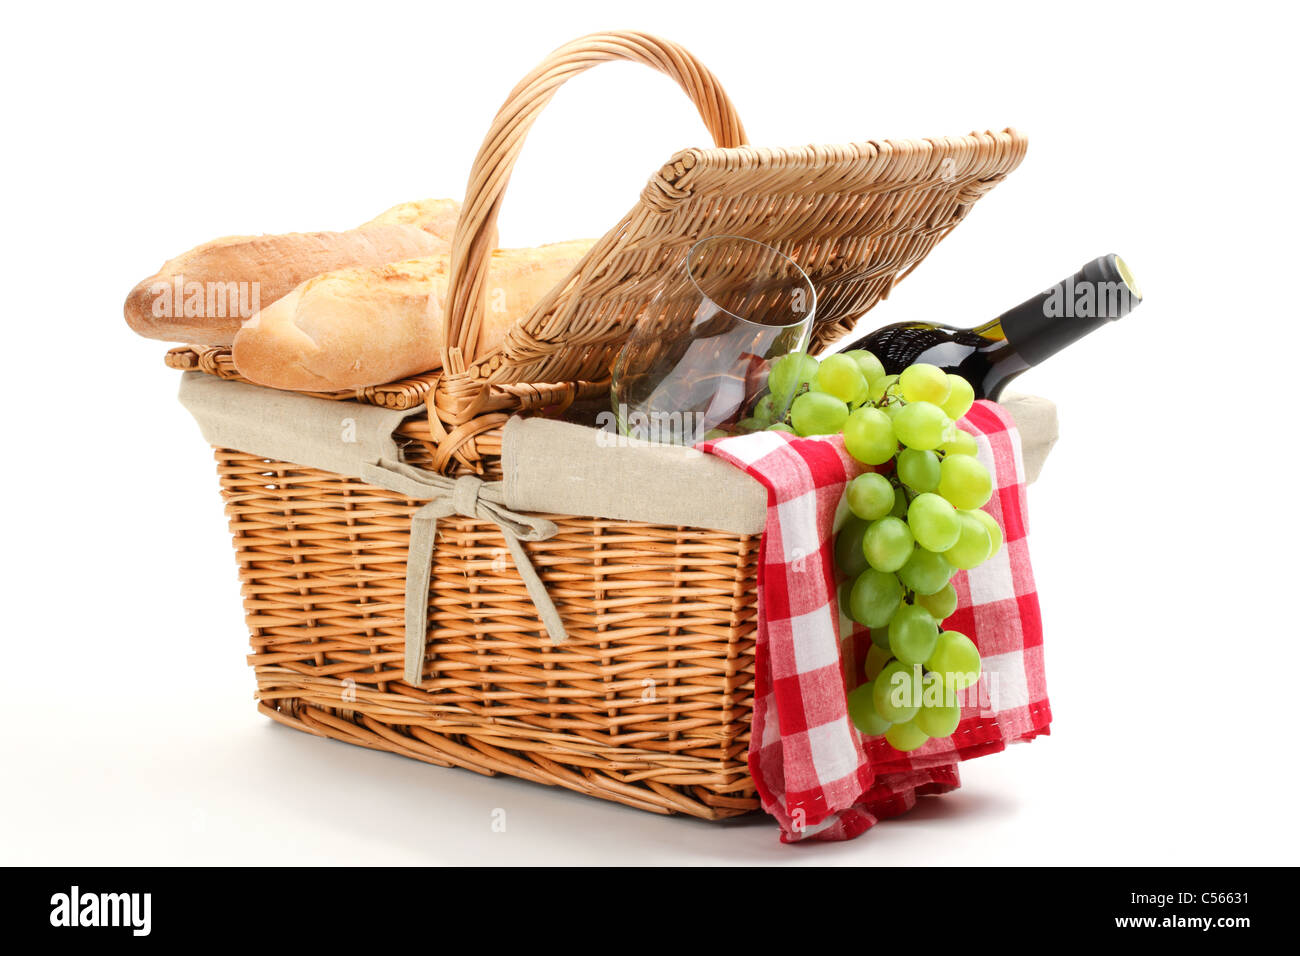 Picnic basket filled with fruit,bread and red wine. Stock Photo